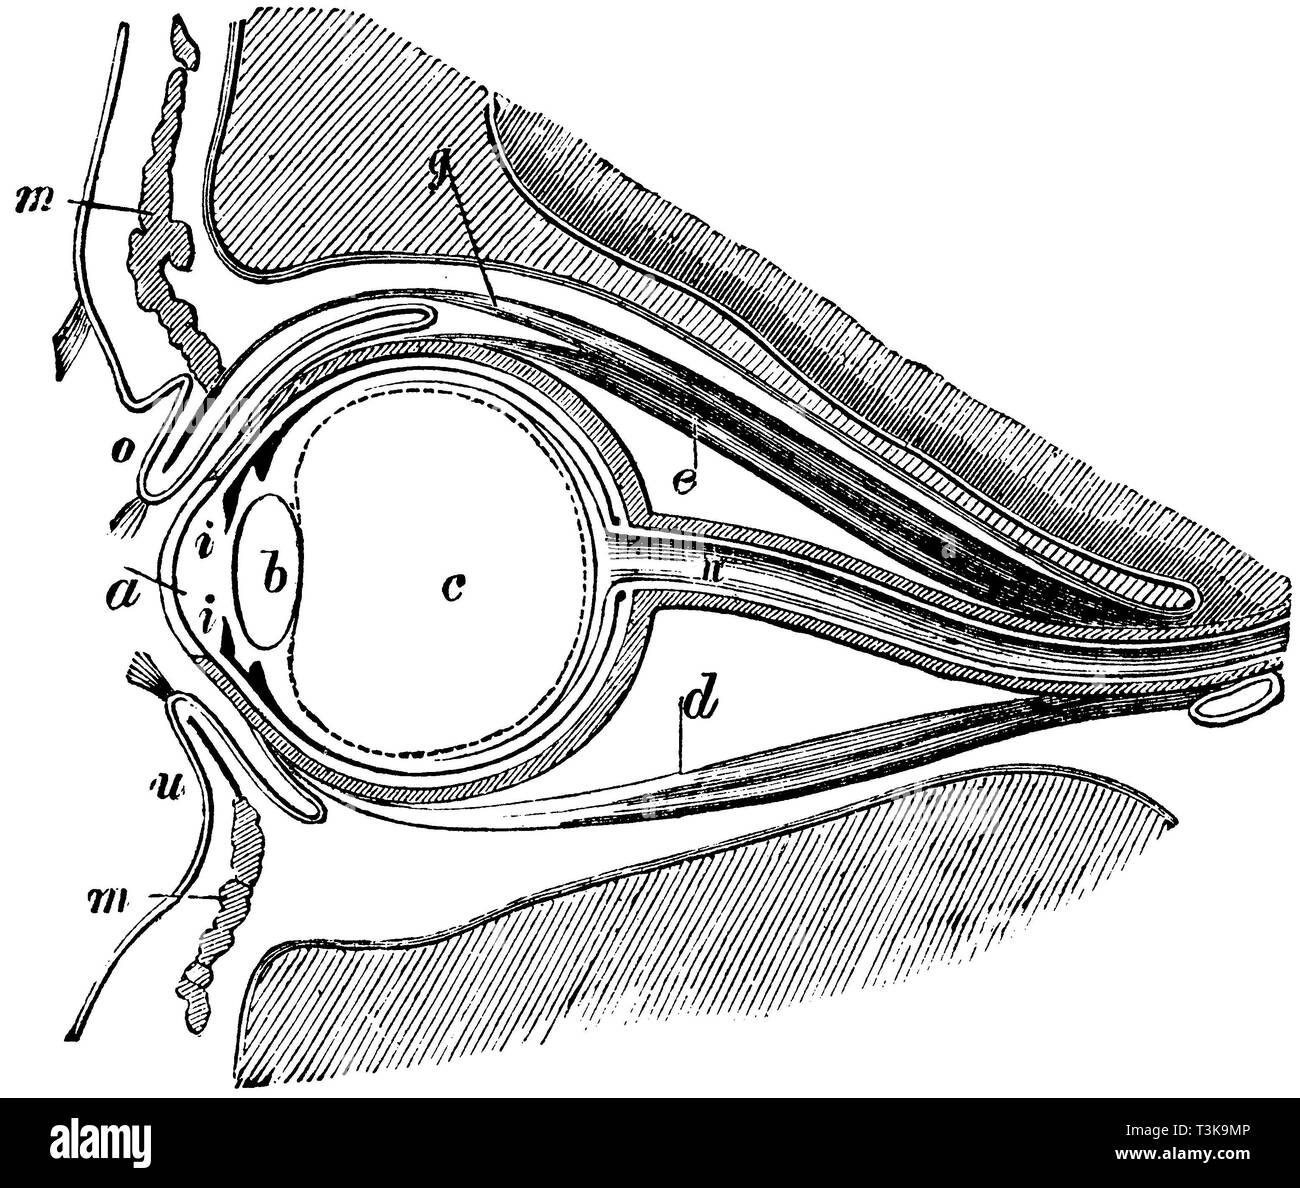 Human : Vertical section of the human eye . a) cornea b ) Krystallinse , c ) vitreous , d ) of the lower straight eye muscle , e) the upper straight eye muscle , g) levator muscle of the upper eyelid , i ) Iris , m) circular muscle , n) optic nerve , o) upper eyelid , u) lower eyelid;Human: vertical section of the human eye. a) cornea, b) crystalline lens, c) vitreous body, d) lower straight eye muscle, e) upper straight eye muscle, g) lifting muscle of upper eyelid, i) iris, m) circles, n) optic nerve, o) upper eyelid, u) lower eyelid, anonym  1877 Stock Photo